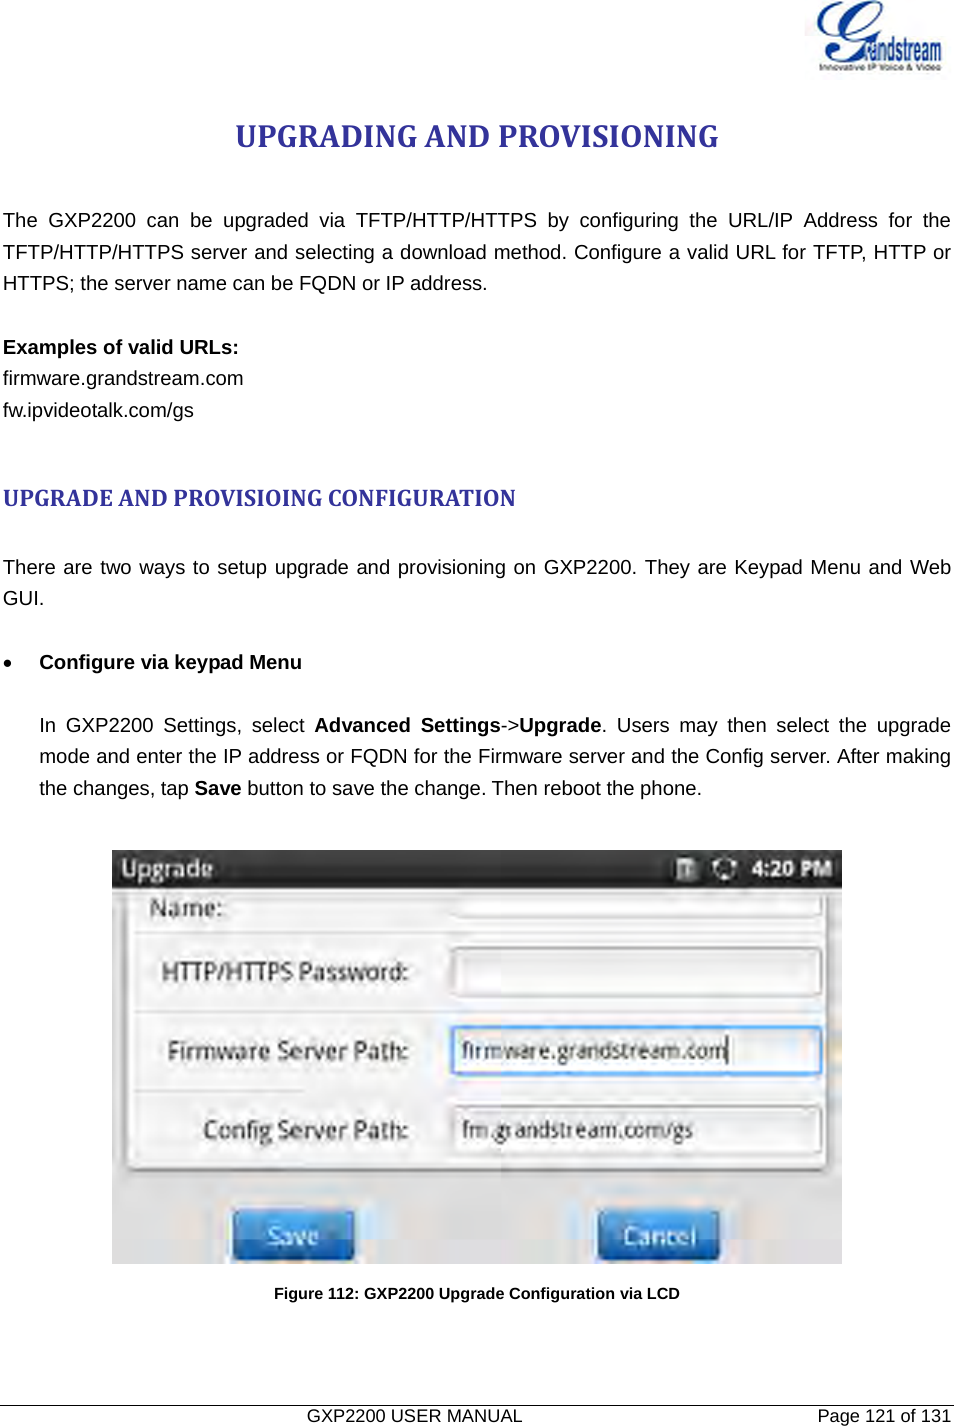   GXP2200 USER MANUAL       Page 121 of 131                                  UPGRADINGANDPROVISIONING The GXP2200 can be upgraded via TFTP/HTTP/HTTPS by configuring the URL/IP Address for the TFTP/HTTP/HTTPS server and selecting a download method. Configure a valid URL for TFTP, HTTP or HTTPS; the server name can be FQDN or IP address.  Examples of valid URLs: firmware.grandstream.com fw.ipvideotalk.com/gs  UPGRADEANDPROVISIOINGCONFIGURATION There are two ways to setup upgrade and provisioning on GXP2200. They are Keypad Menu and Web GUI.  • Configure via keypad Menu    In GXP2200 Settings, select Advanced Settings-&gt;Upgrade. Users may then select the upgrade mode and enter the IP address or FQDN for the Firmware server and the Config server. After making the changes, tap Save button to save the change. Then reboot the phone.   Figure 112: GXP2200 Upgrade Configuration via LCD    